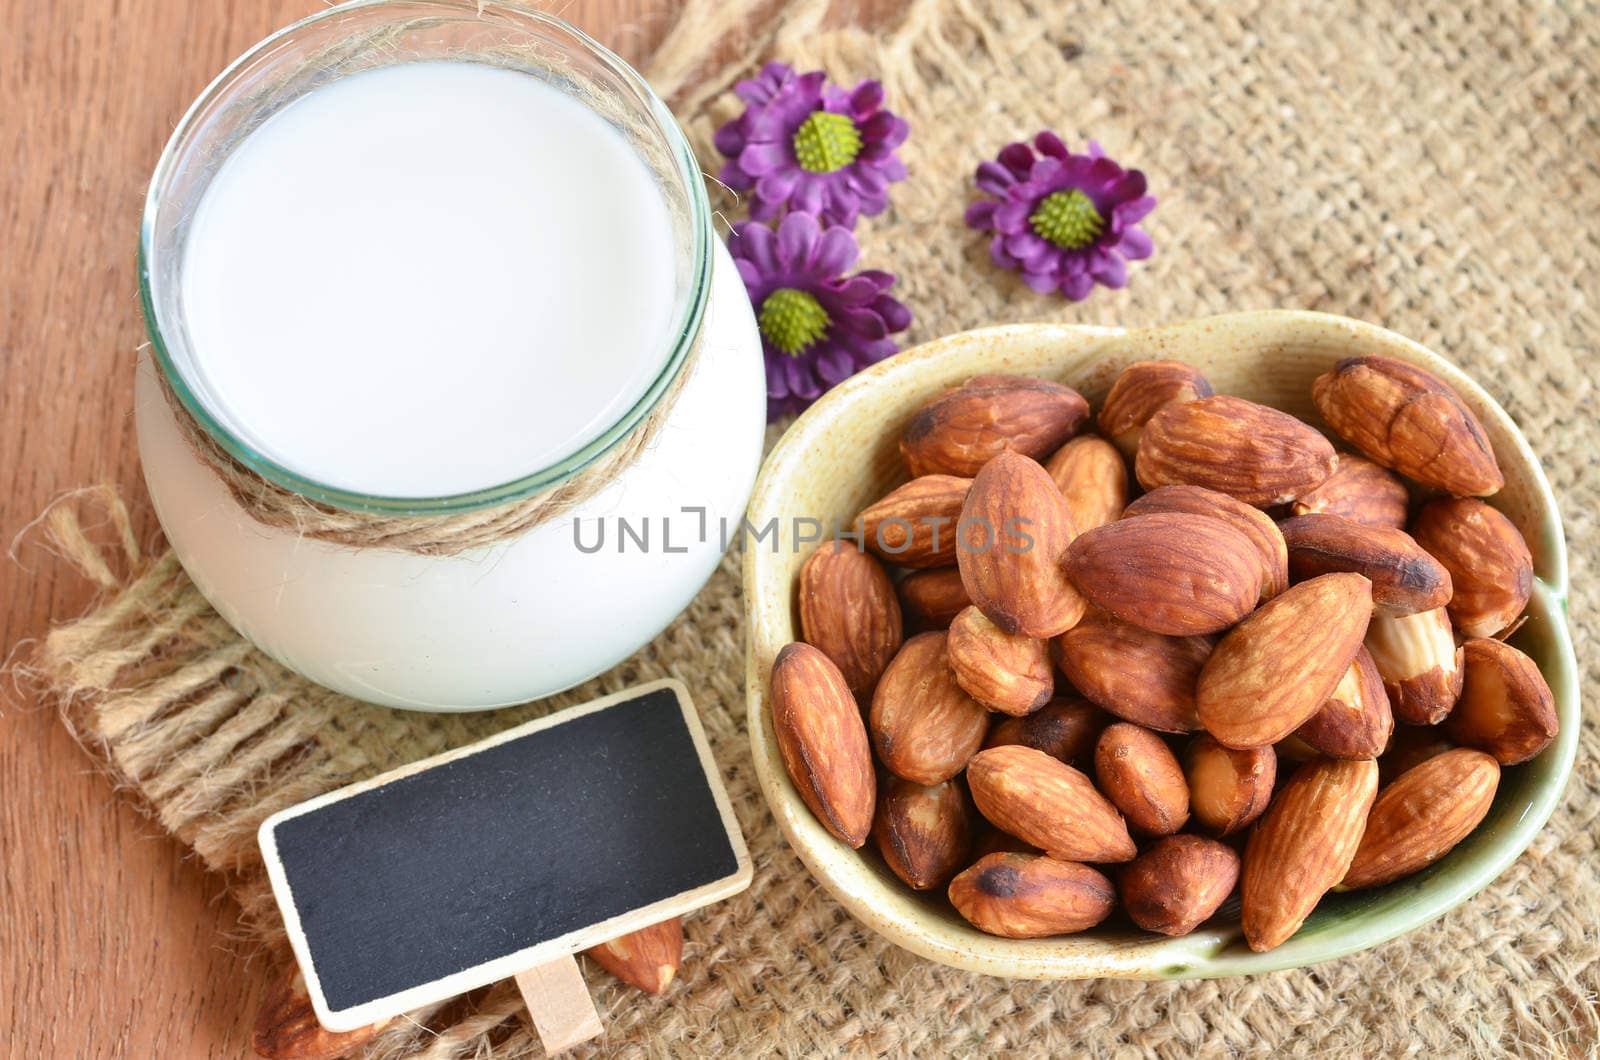 Almond milk in glass with almonds and blank tag on sack background.